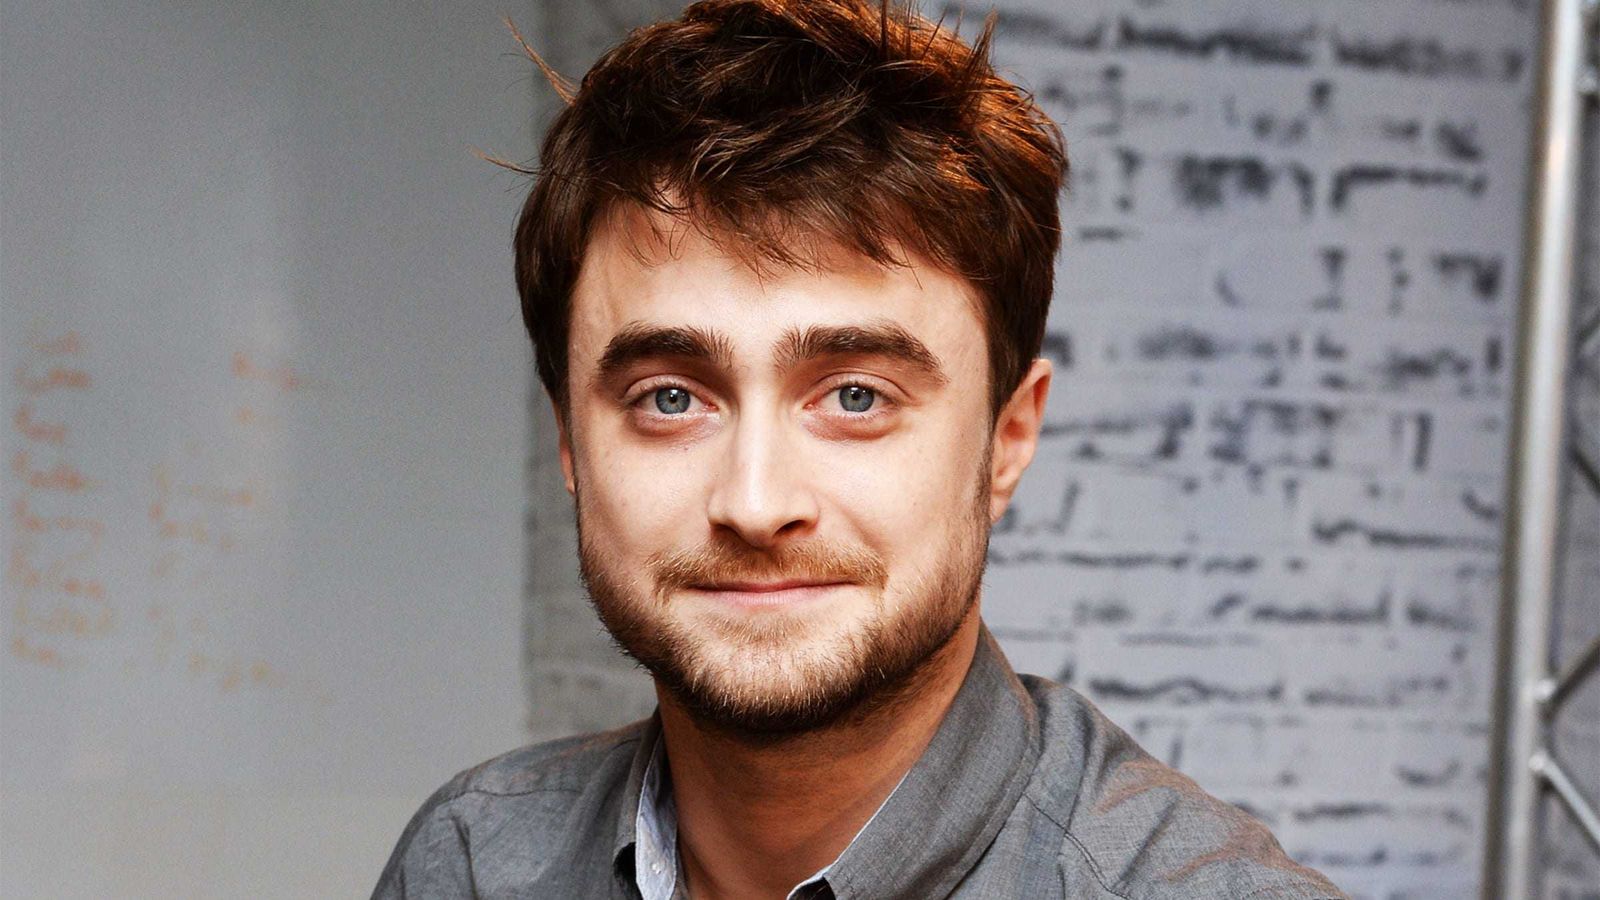 'Fans of adult animation have much to look forward to': Daniel Radcliffe enters the world of celebrity archeologists in Digman